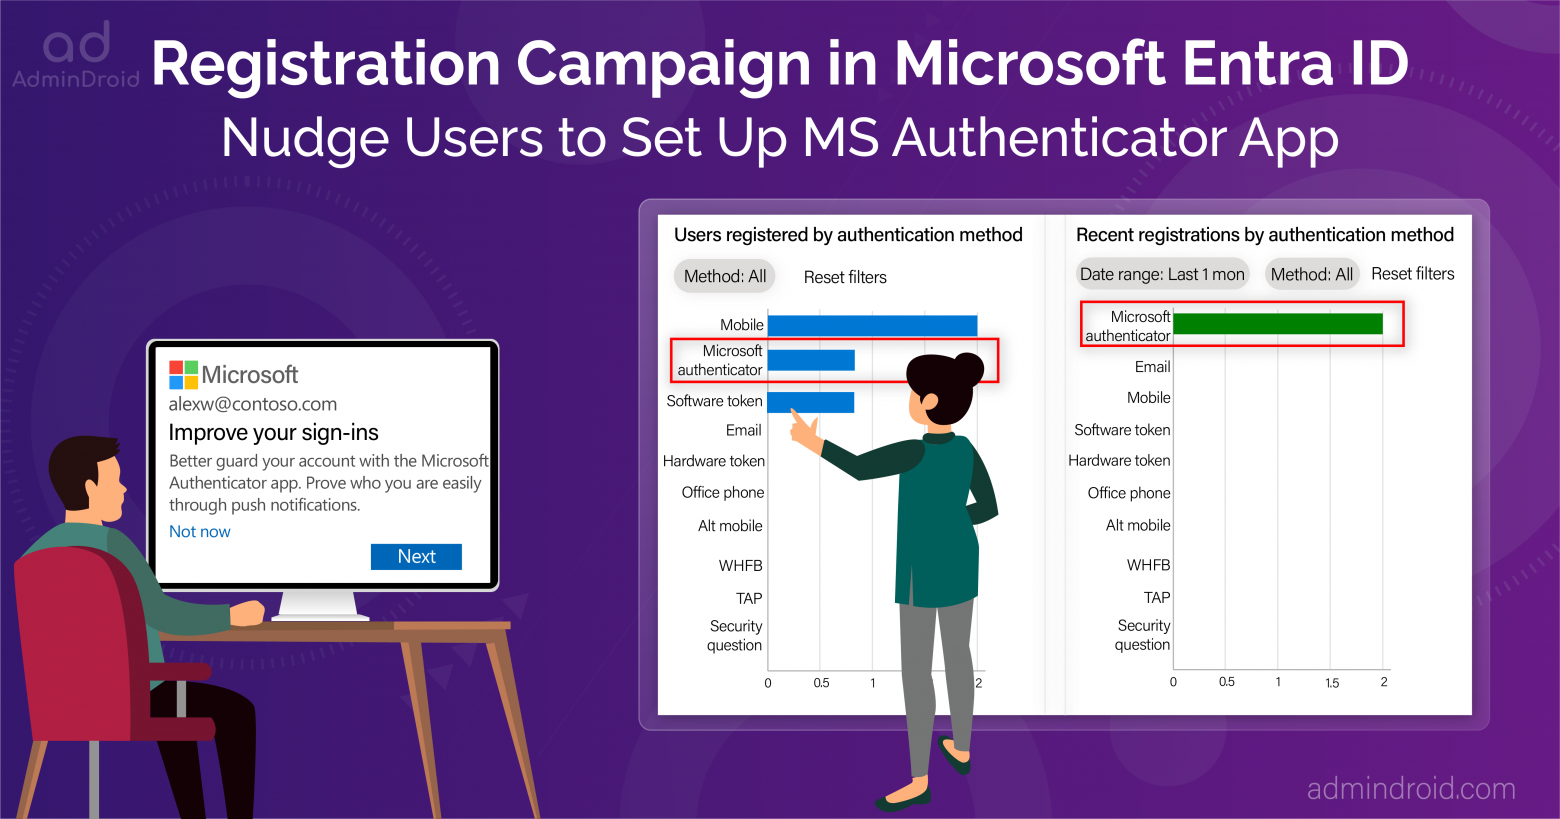 Registration Campaign in Microsoft Entra ID–Nudge Users to set up MS Authenticator App 